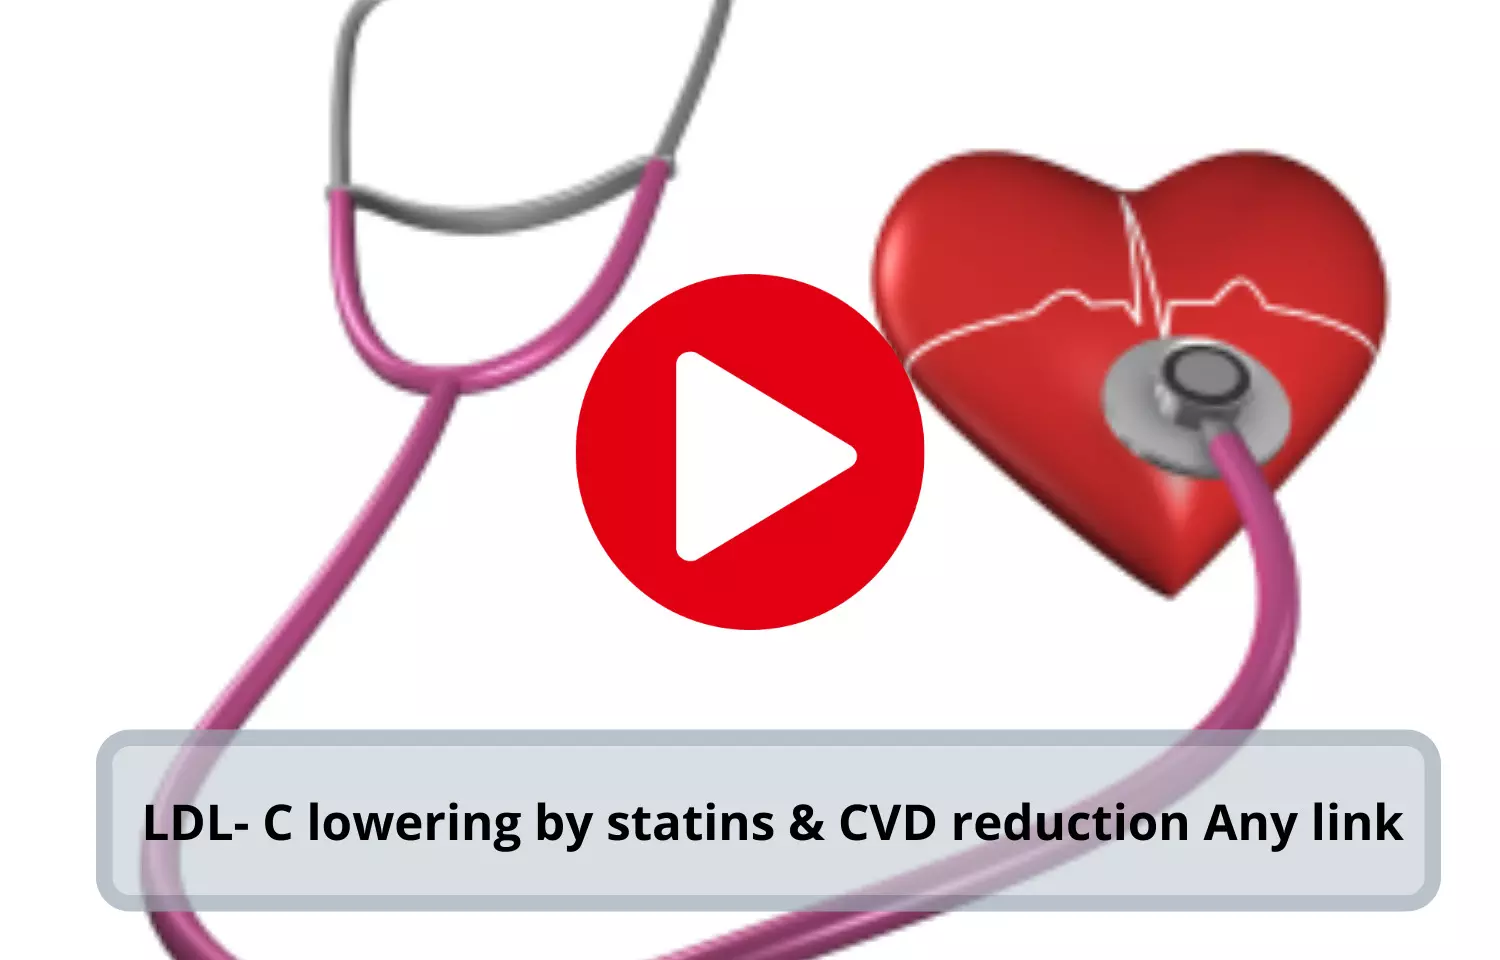 LDL- C lowering by statins & CVD reduction Associated?